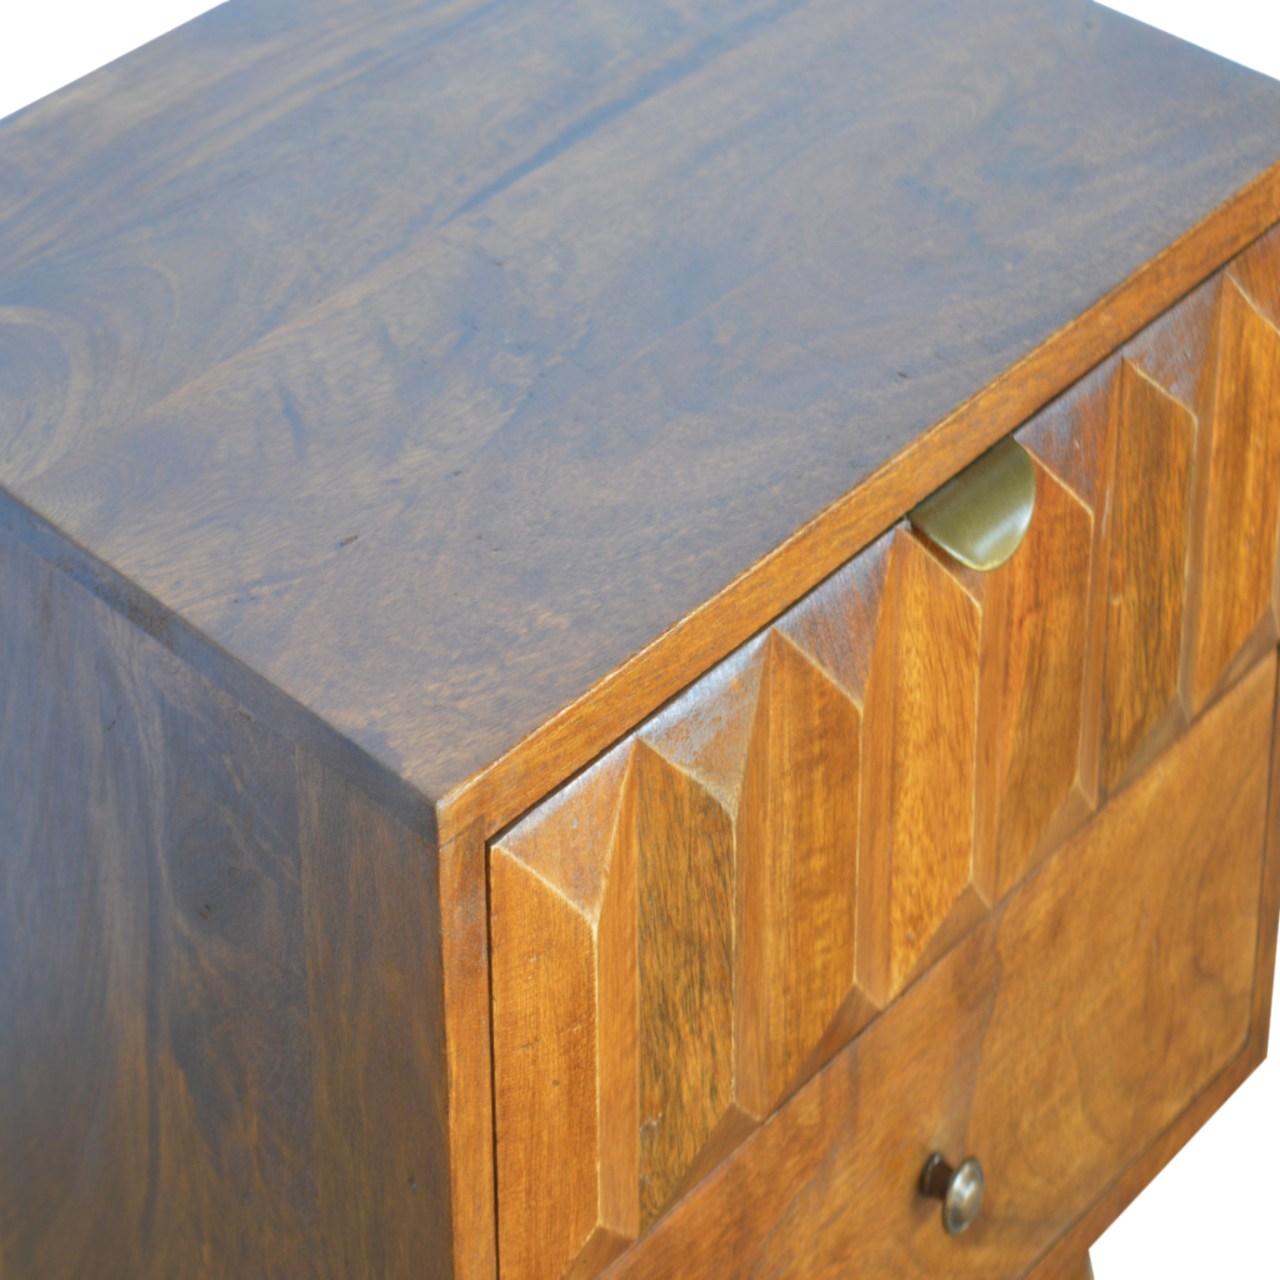 Solid Wood Bedside with Carved Drawer Front